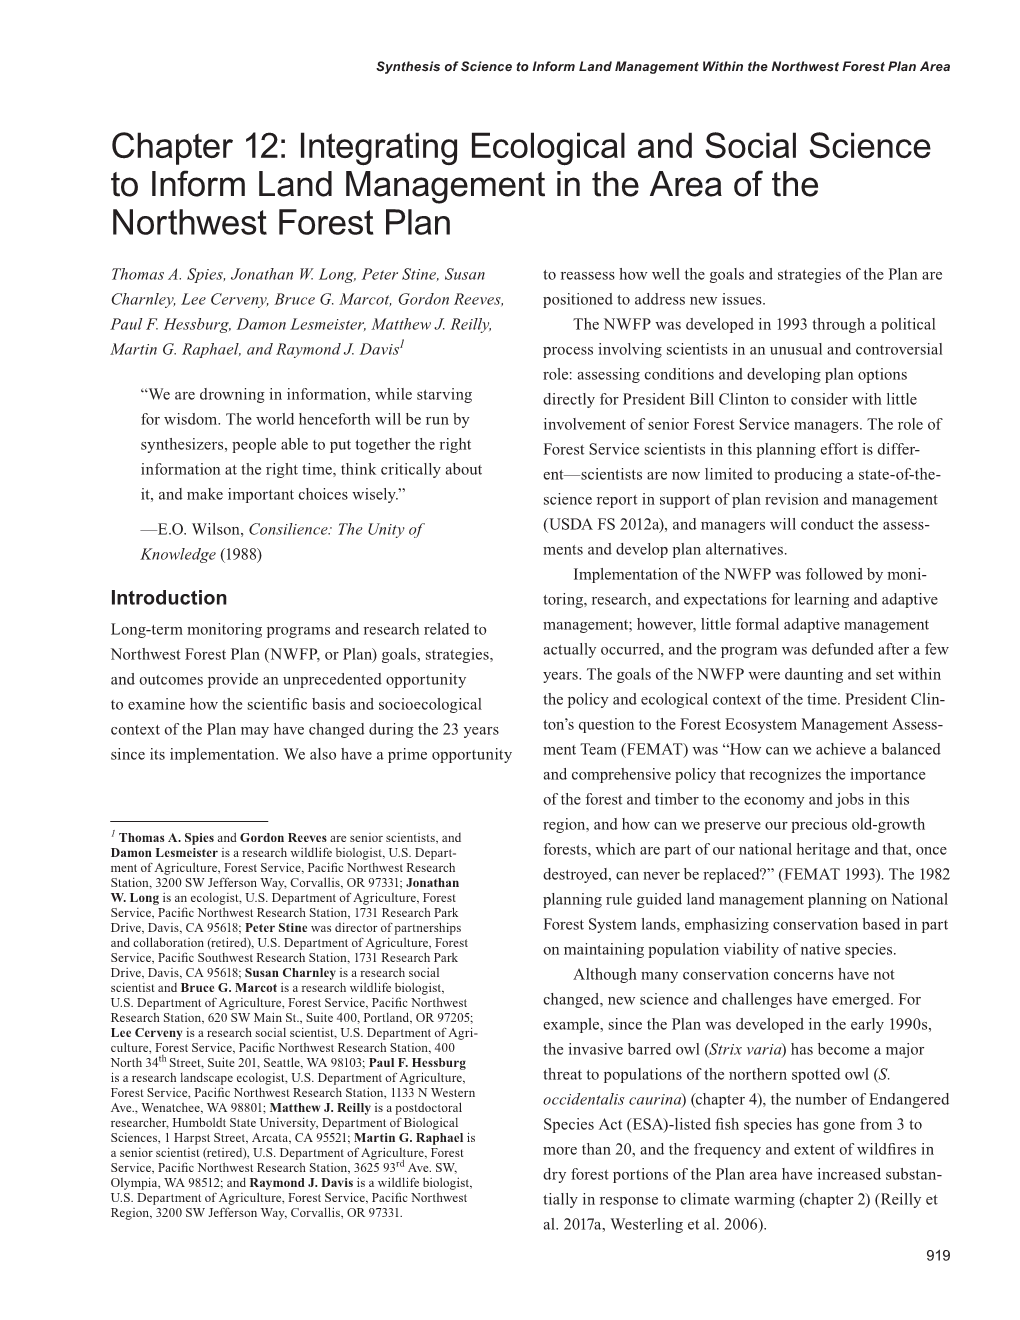 Integrating Ecological and Social Science to Inform Land Management in the Area of the Northwest Forest Plan